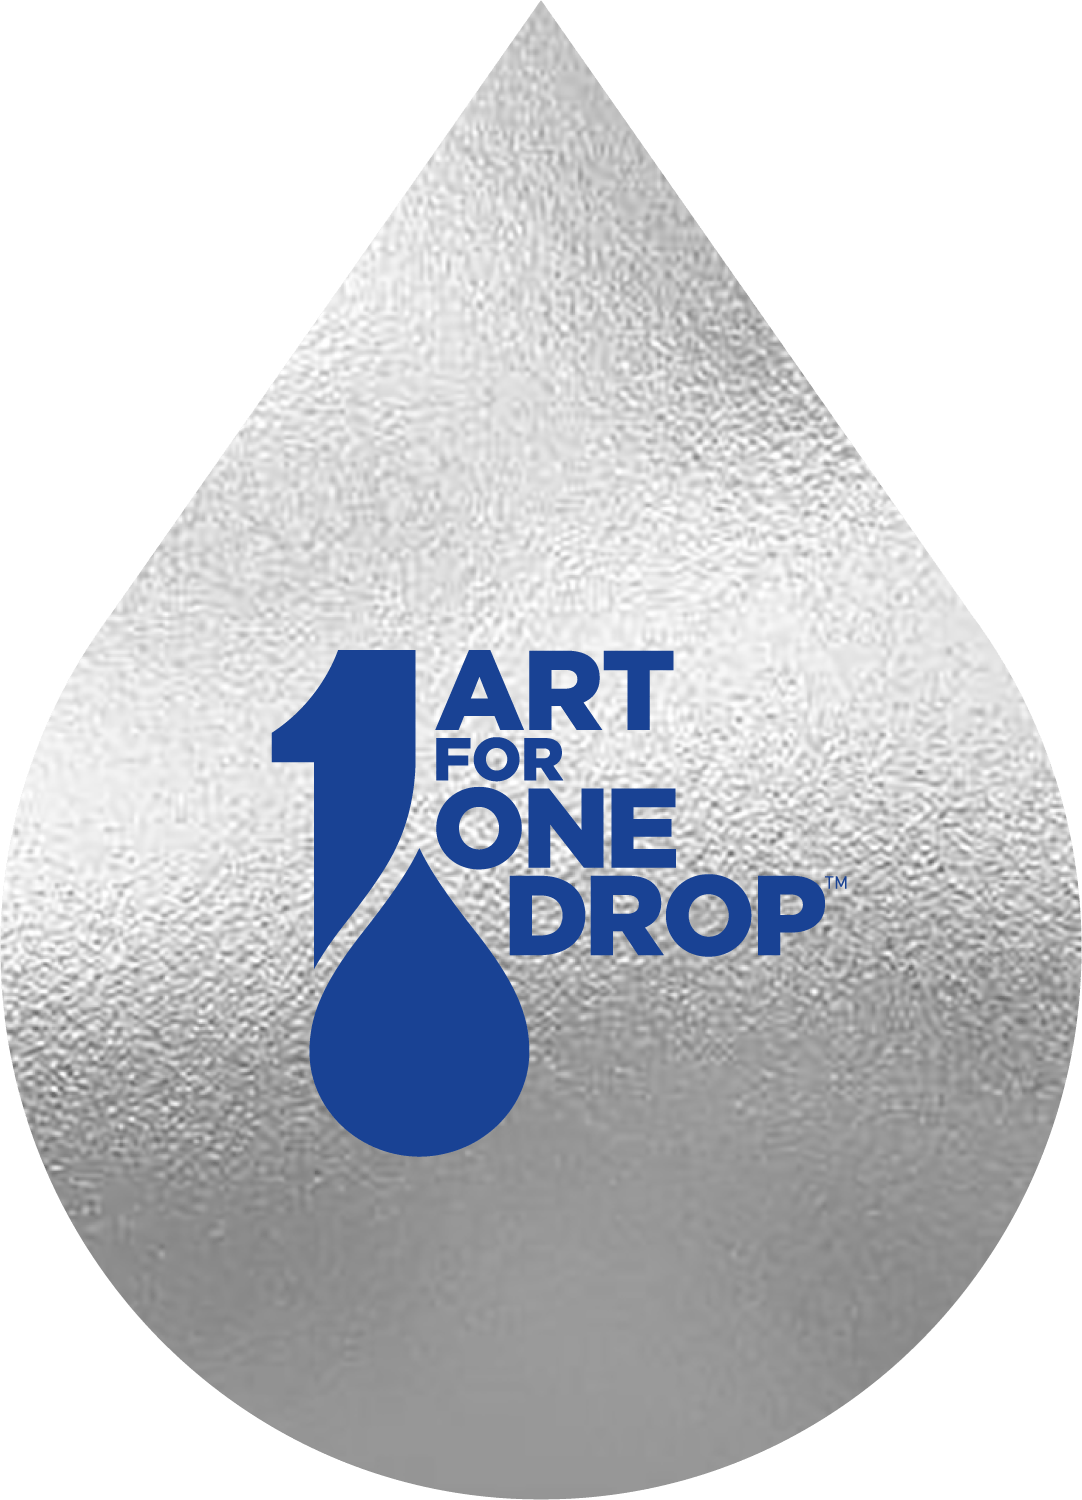 One Drop Logo - PHILLIPS : Art for One Drop